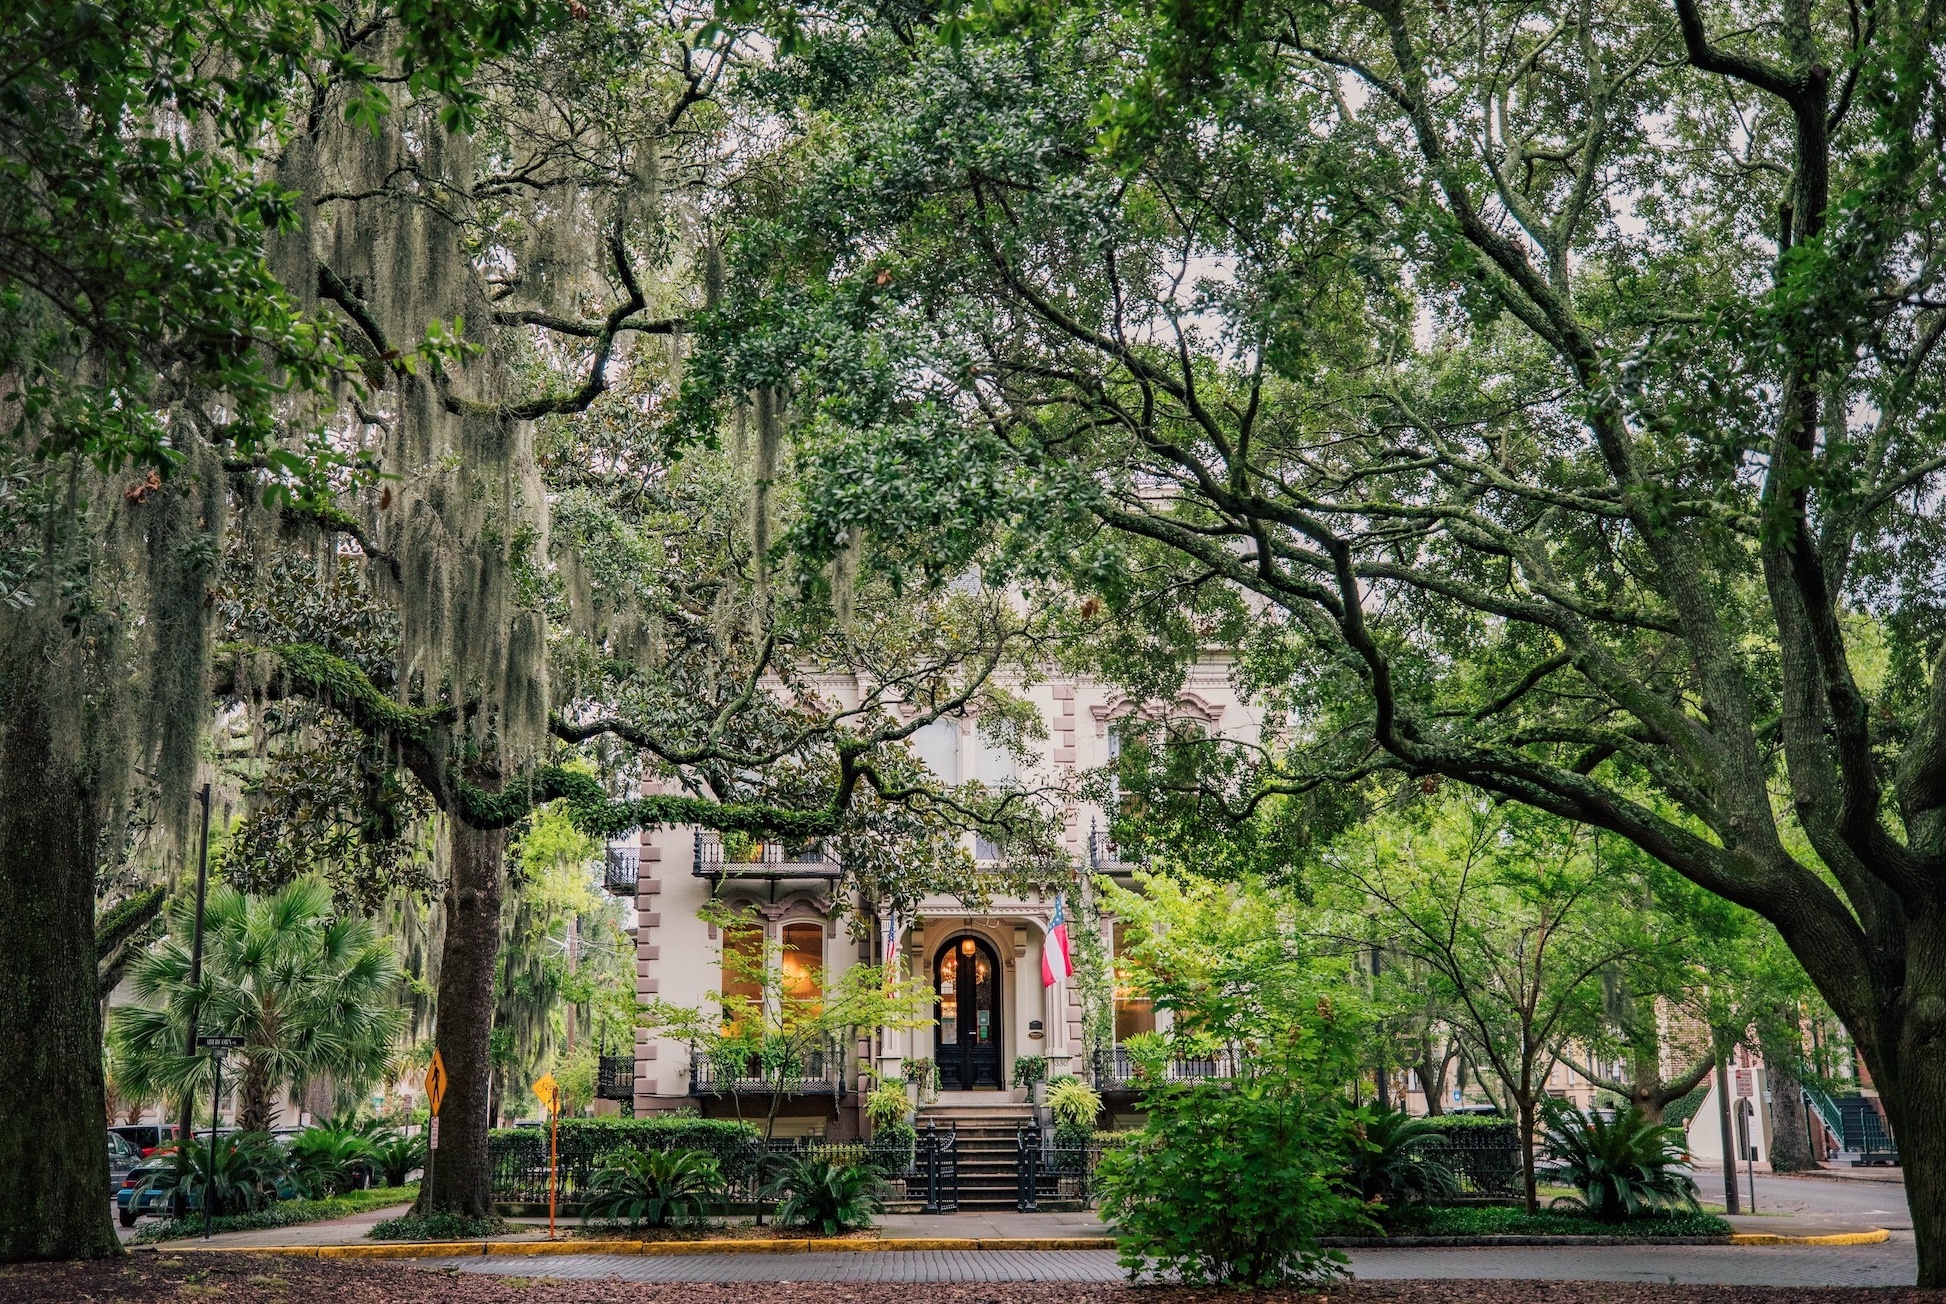 A look down one end of a Square in Savannah, GA; image by Sunira Moses, via Unsplash.com.